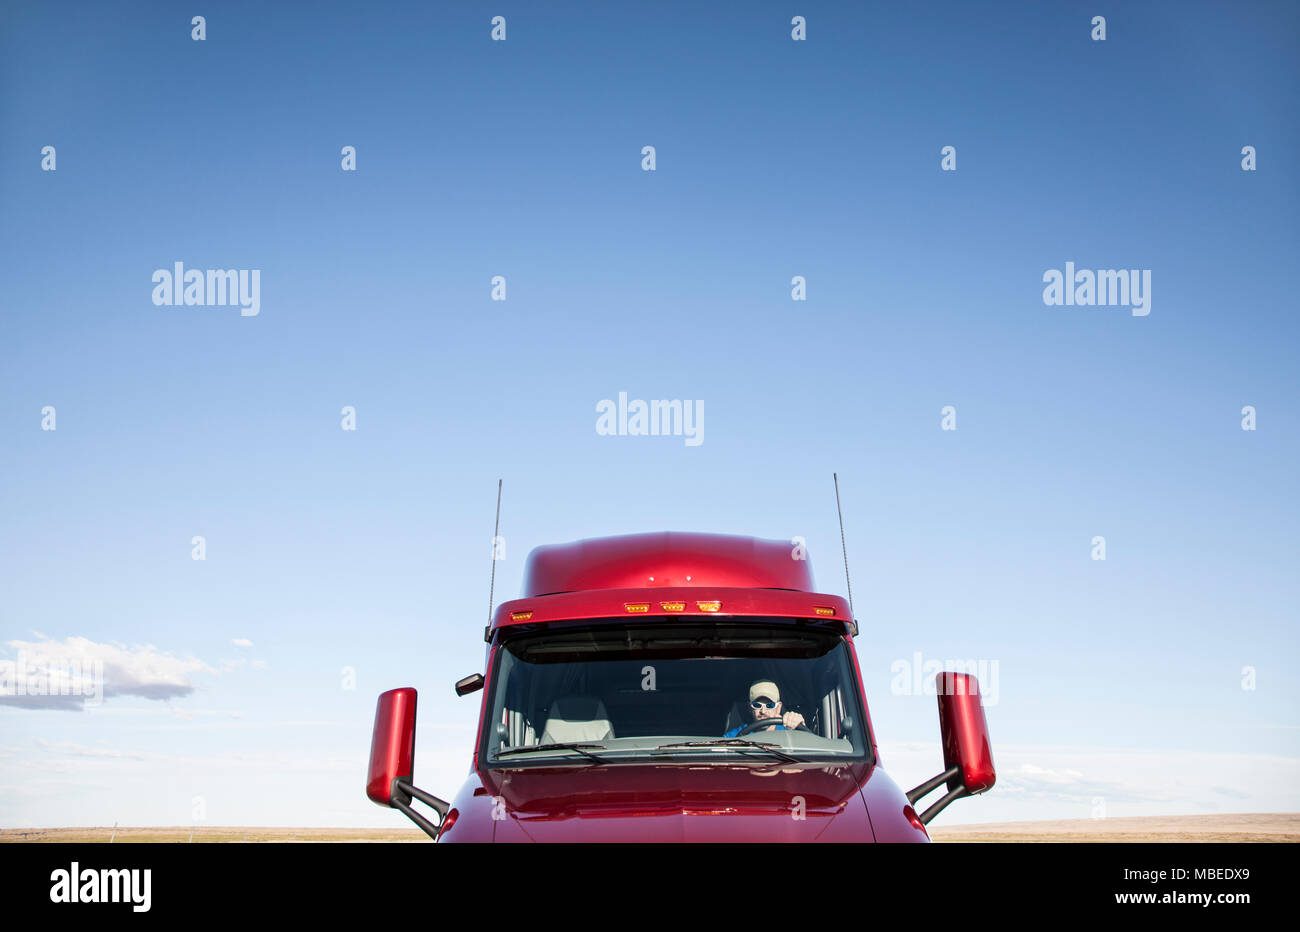 View of a Caucasian woman driver in the cab of her  commercial truck. Stock Photo